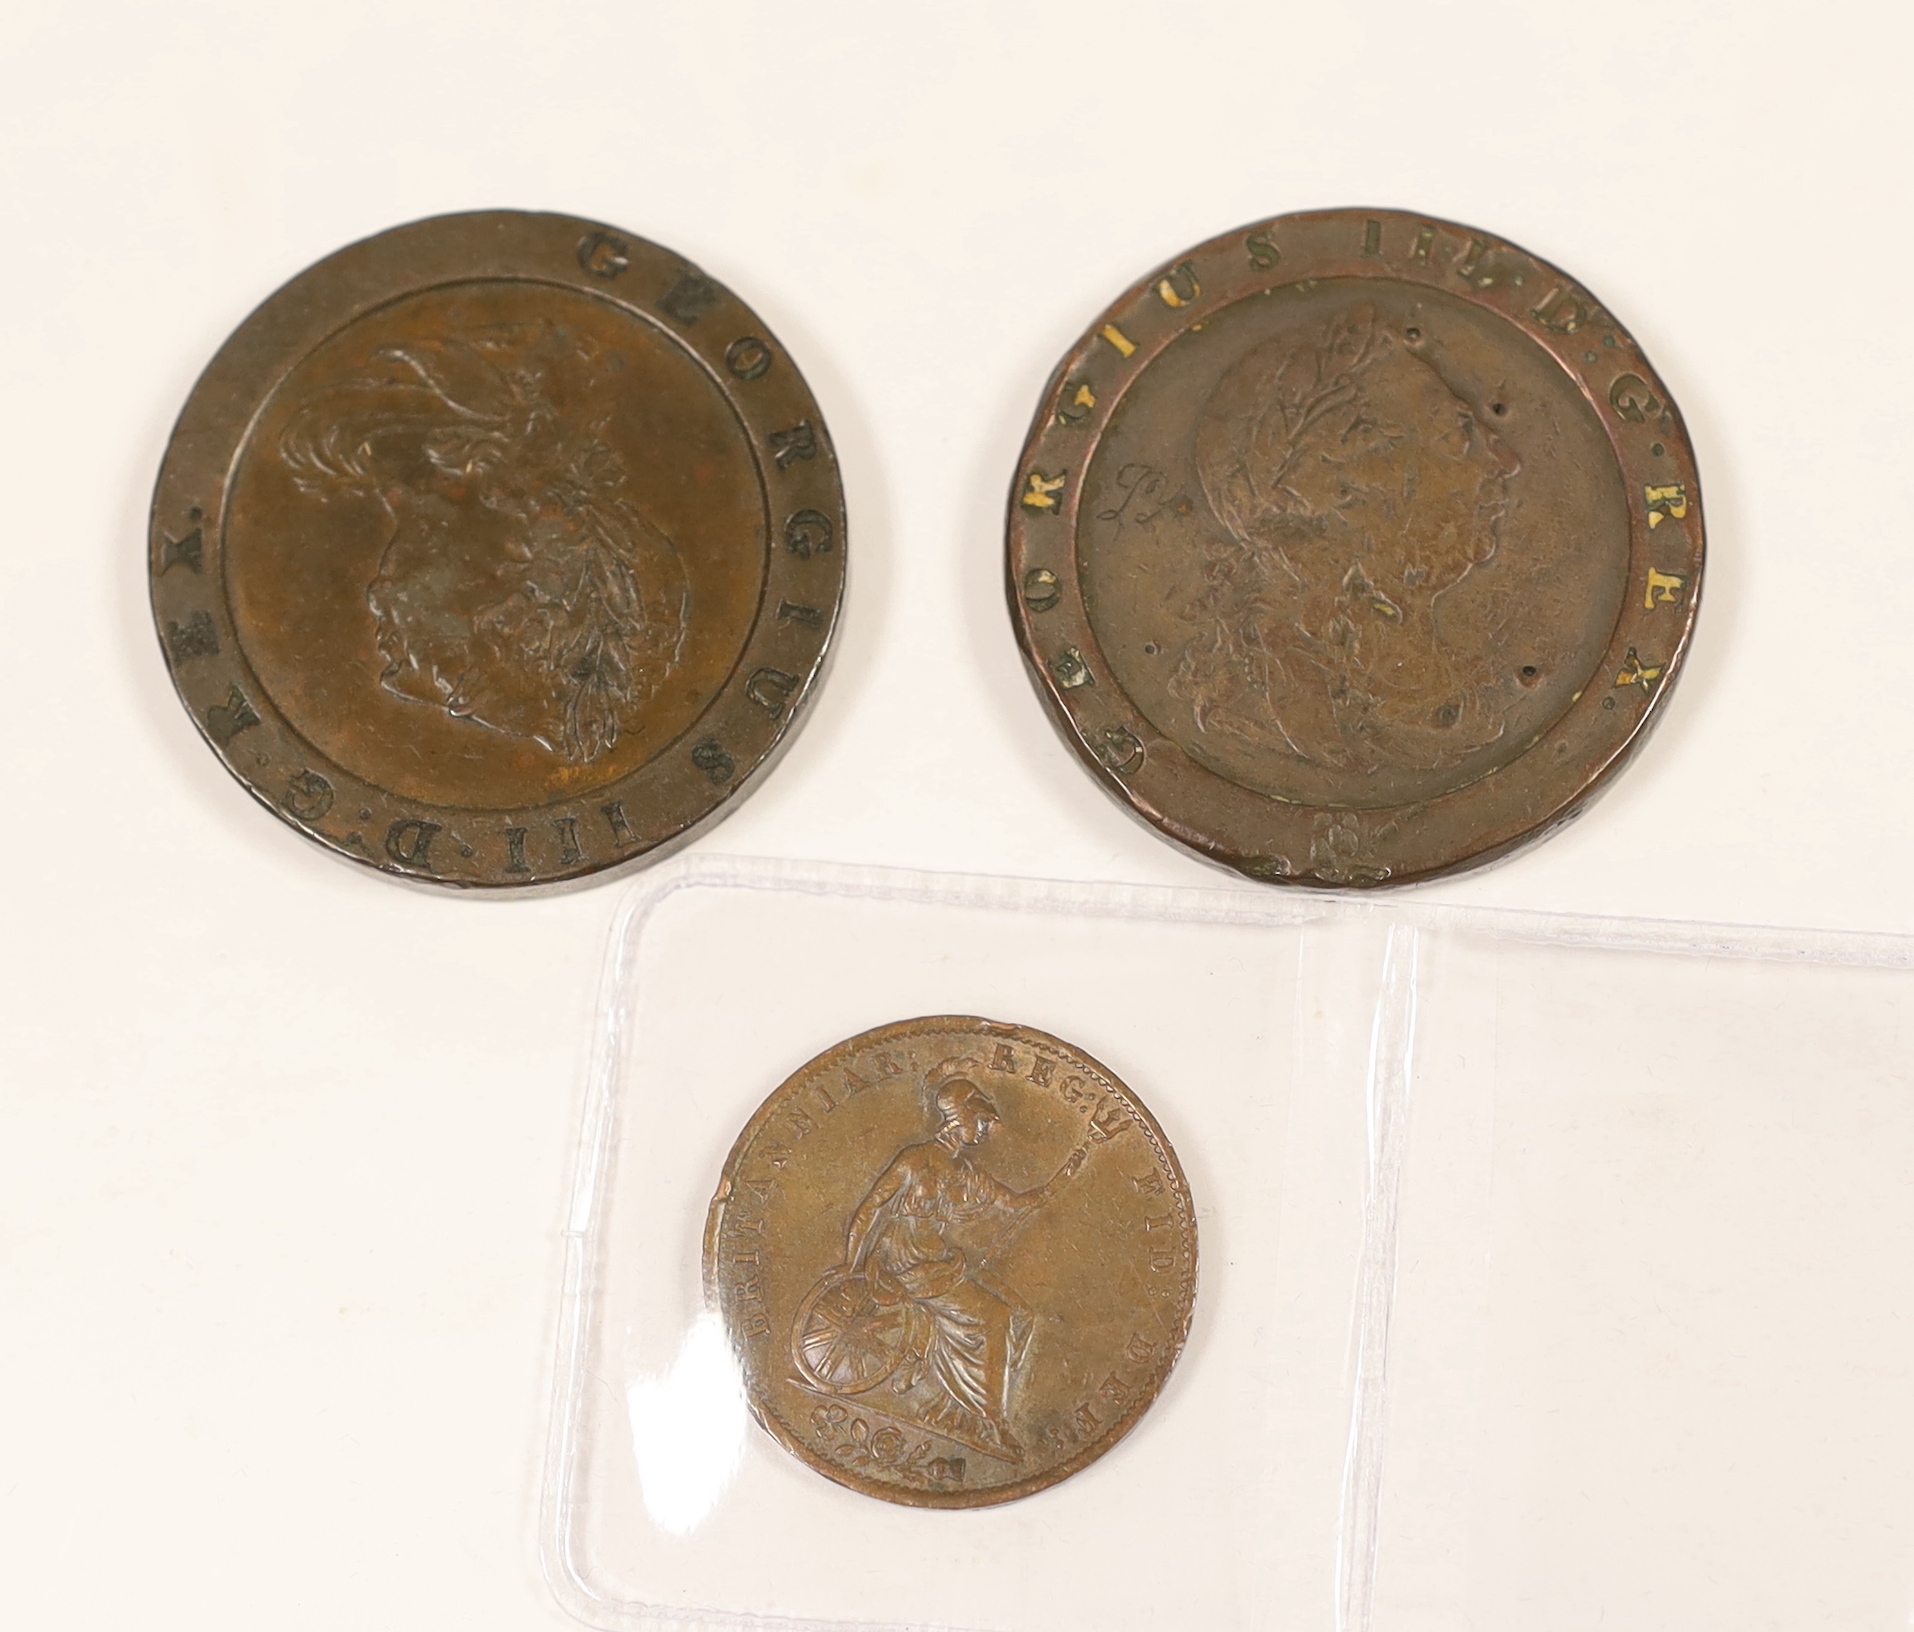 British coins, A George III cartwheel twopence, about VF, another in poor condition and and Victoria halfpenny, 1855, edge nicks otherwise VF